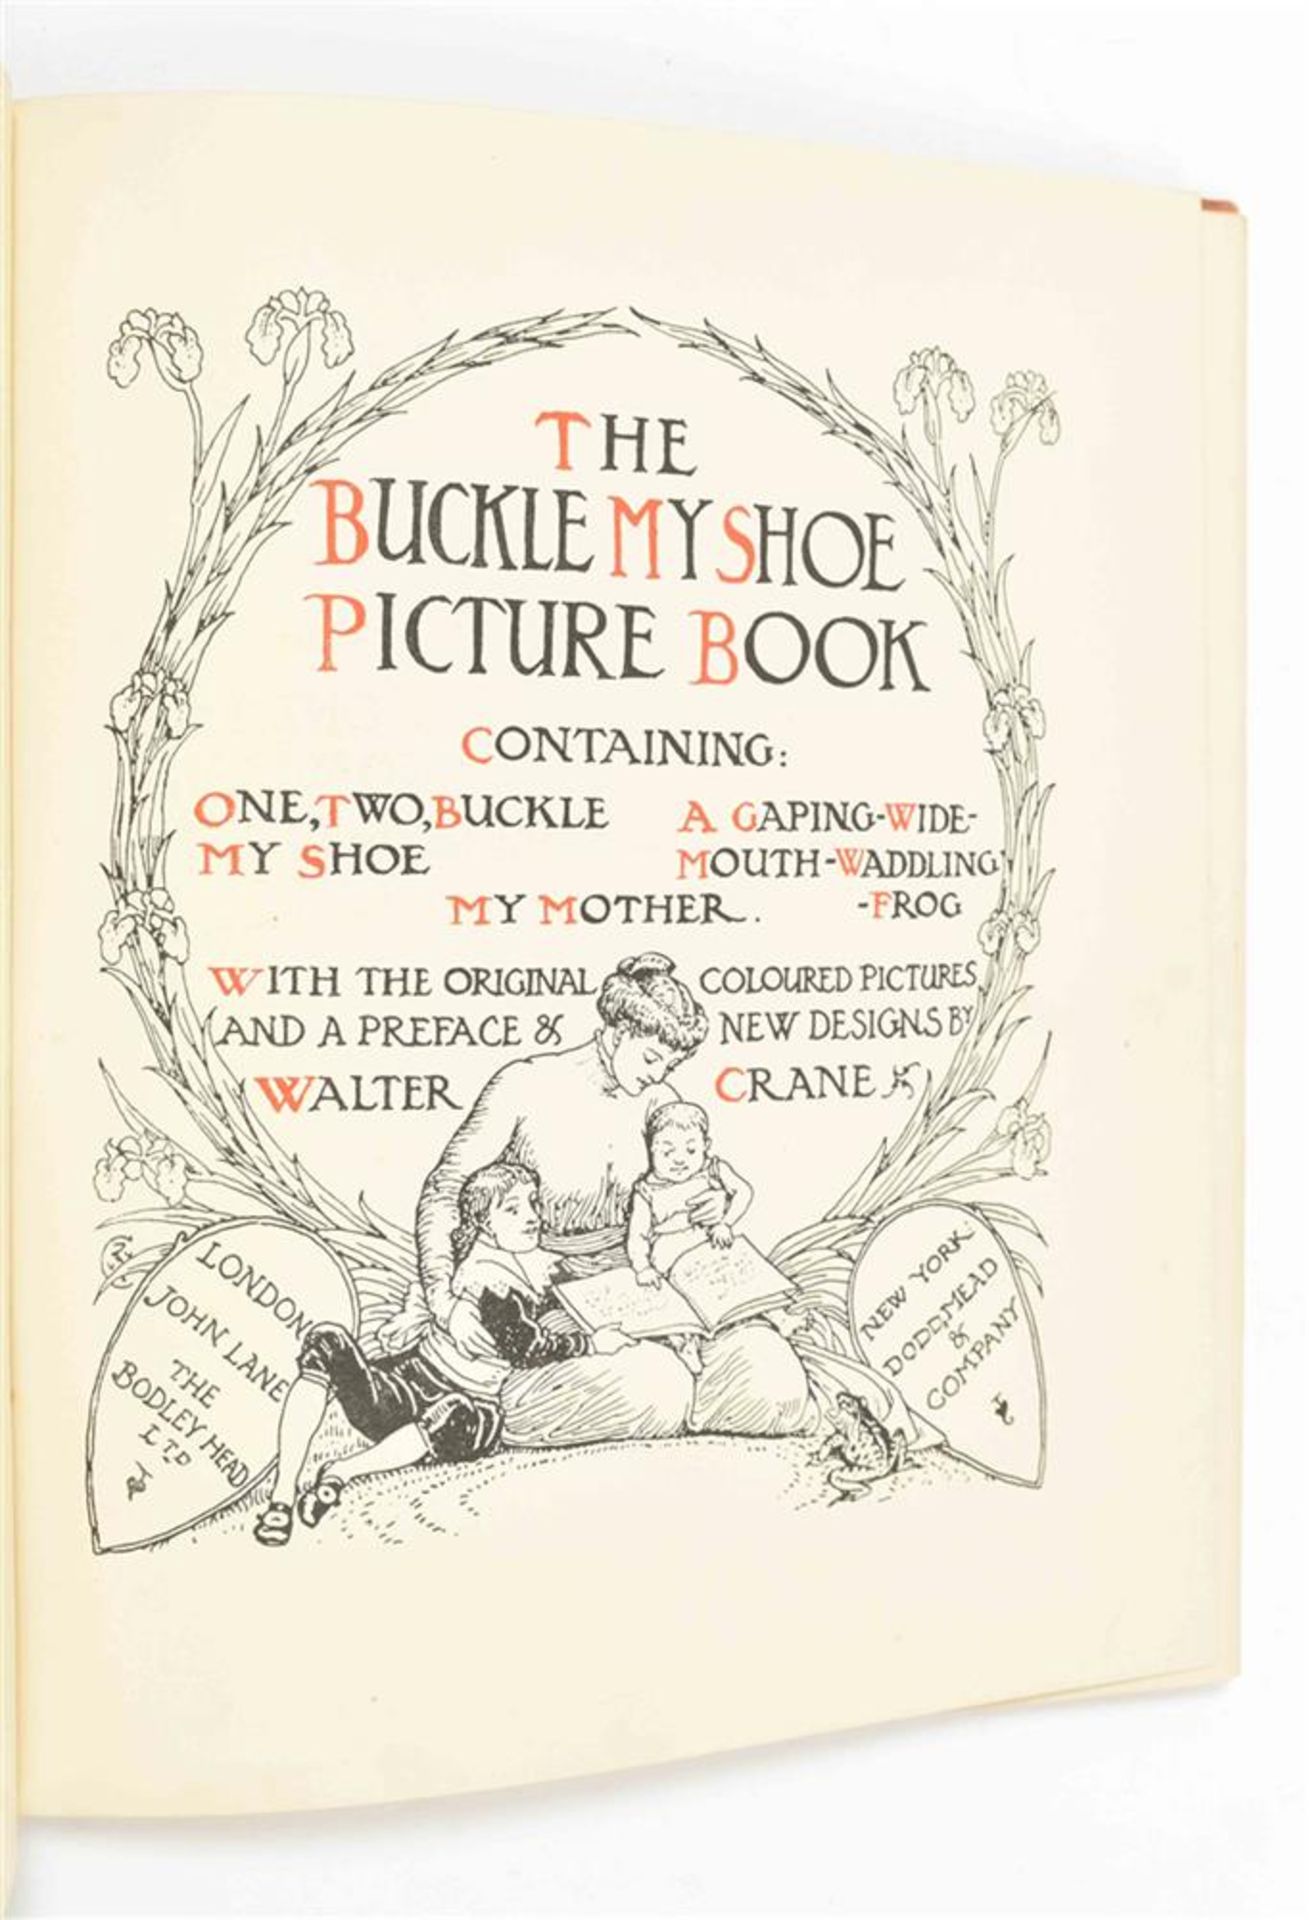 Crane, W. Four titles illustrated by Crane: (1) The Buckle My Shoe Picture Book - Image 7 of 10